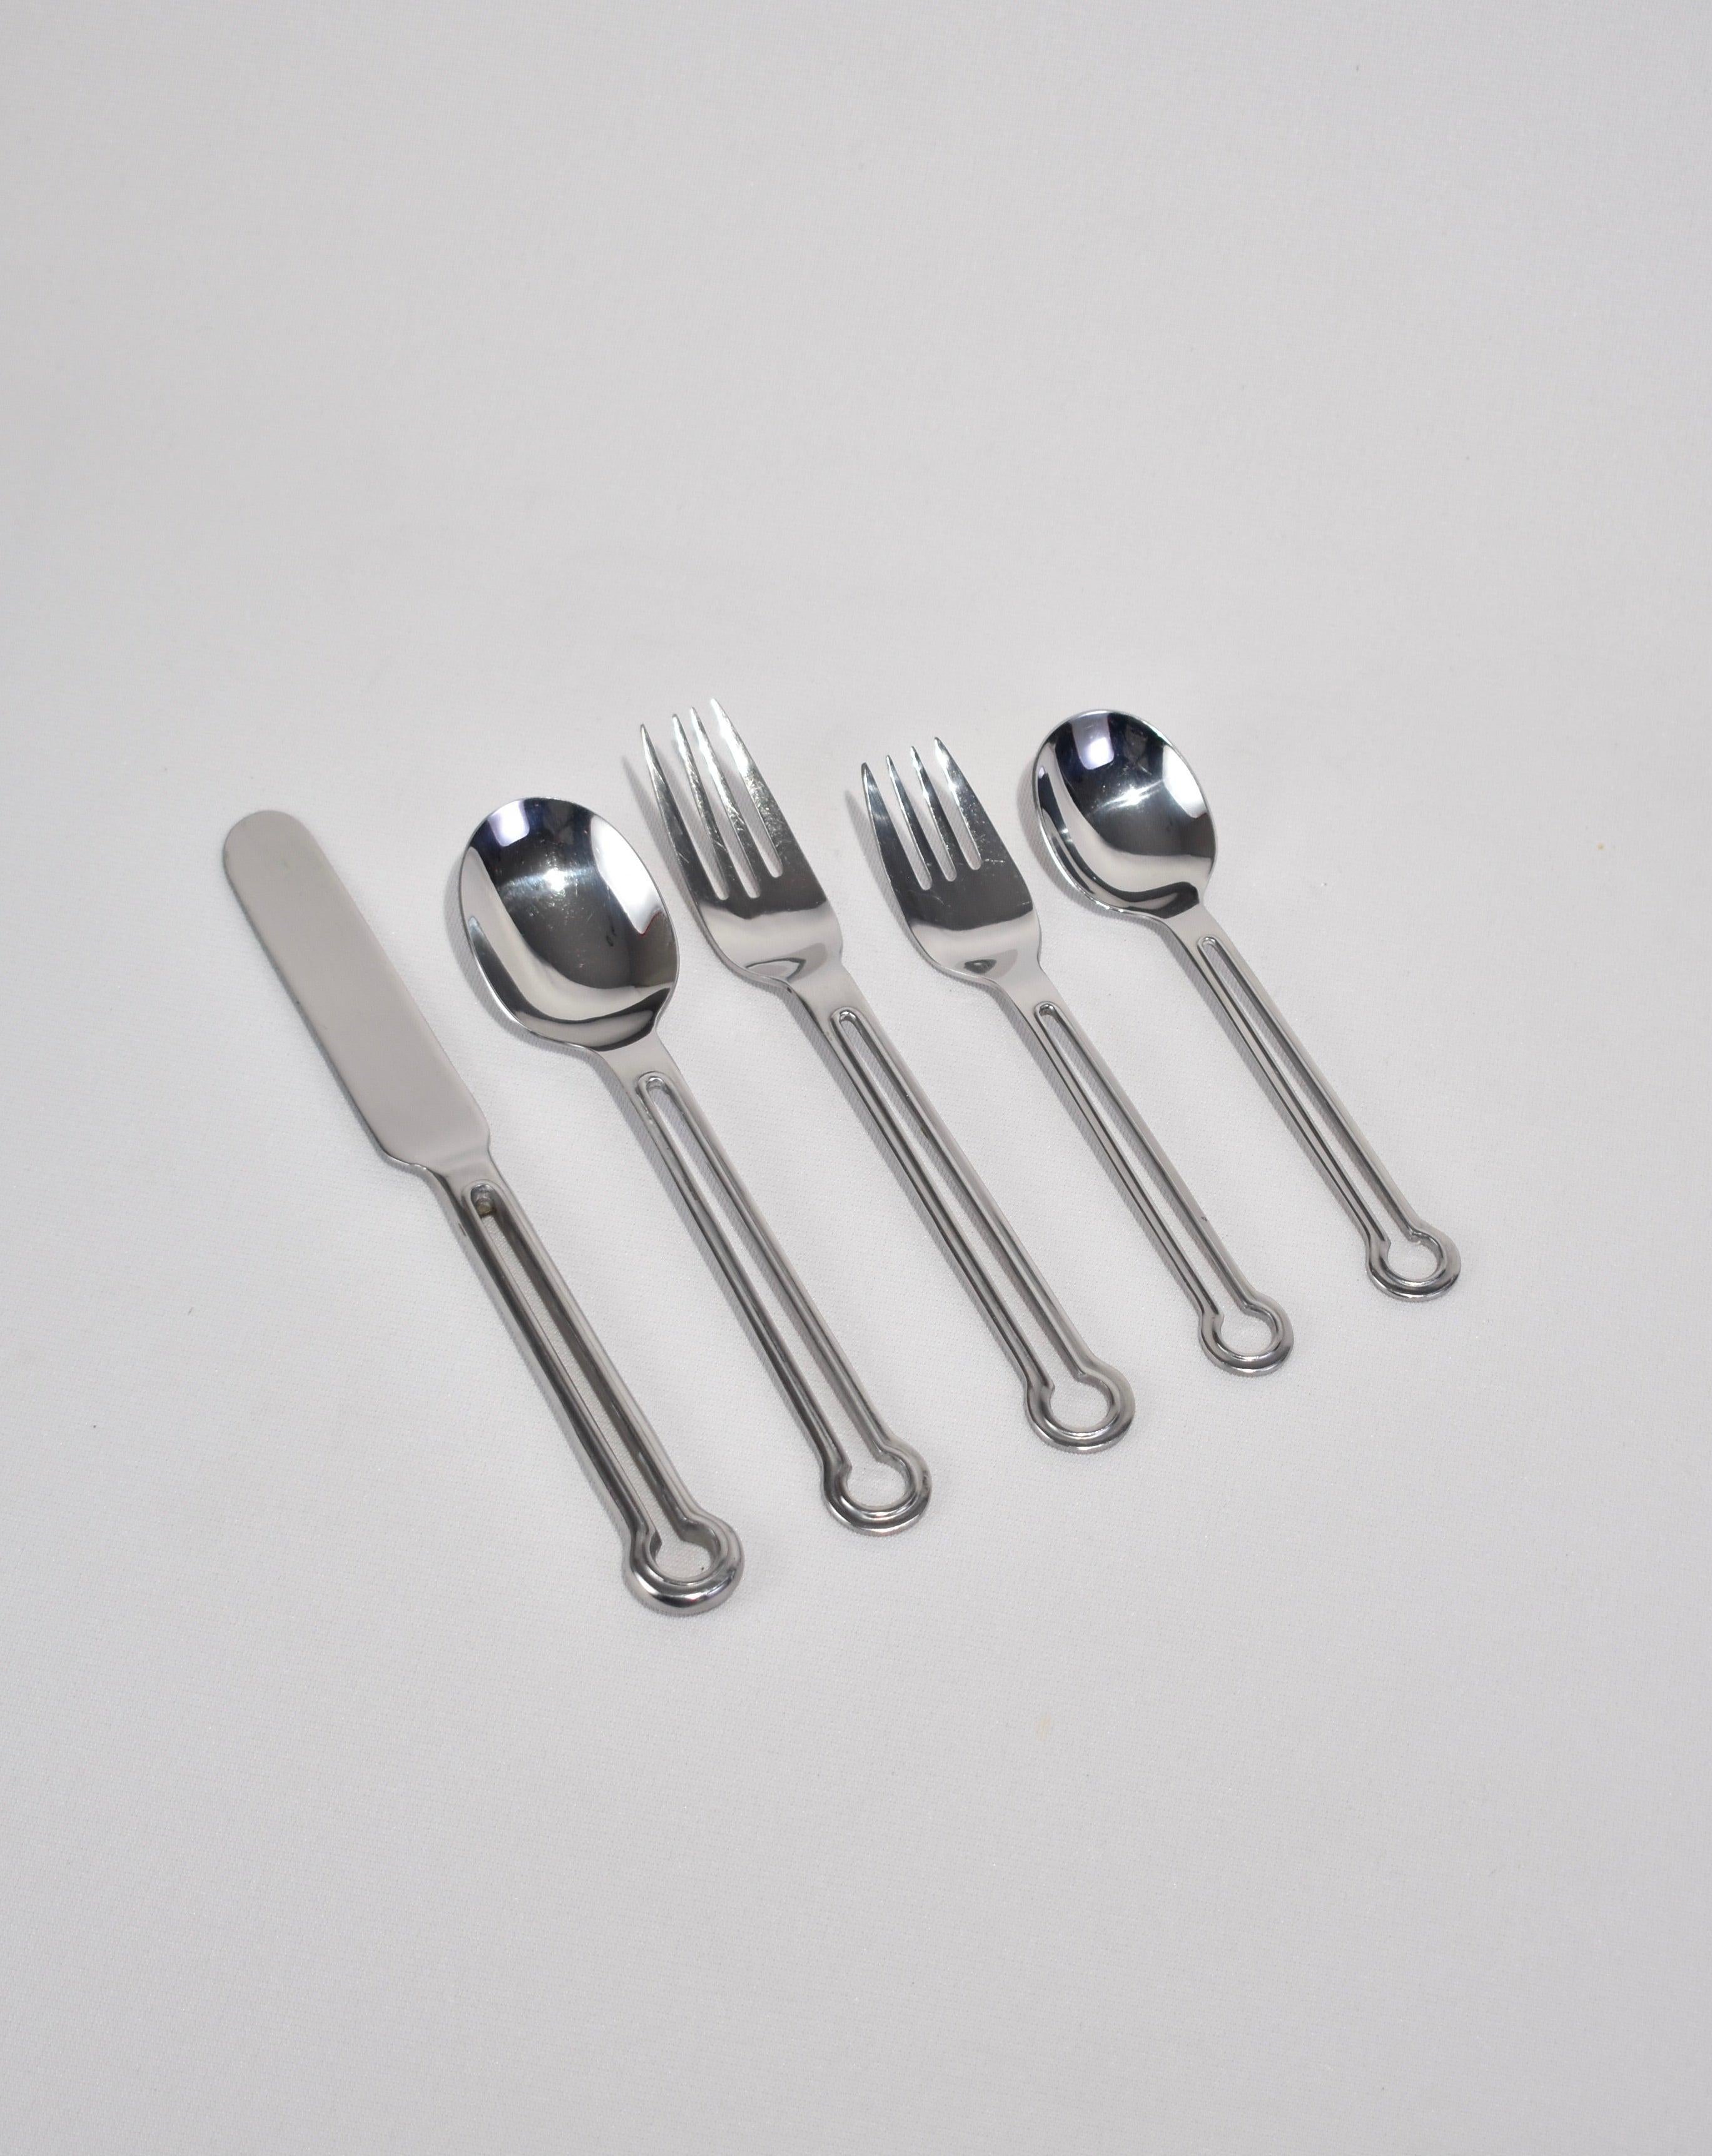 Rare, stainless steel five-piece flatware set with cutout handle. Stamped Oxford Hall, Stainless Korea.

Purchase includes one set of five pieces, two sets available.